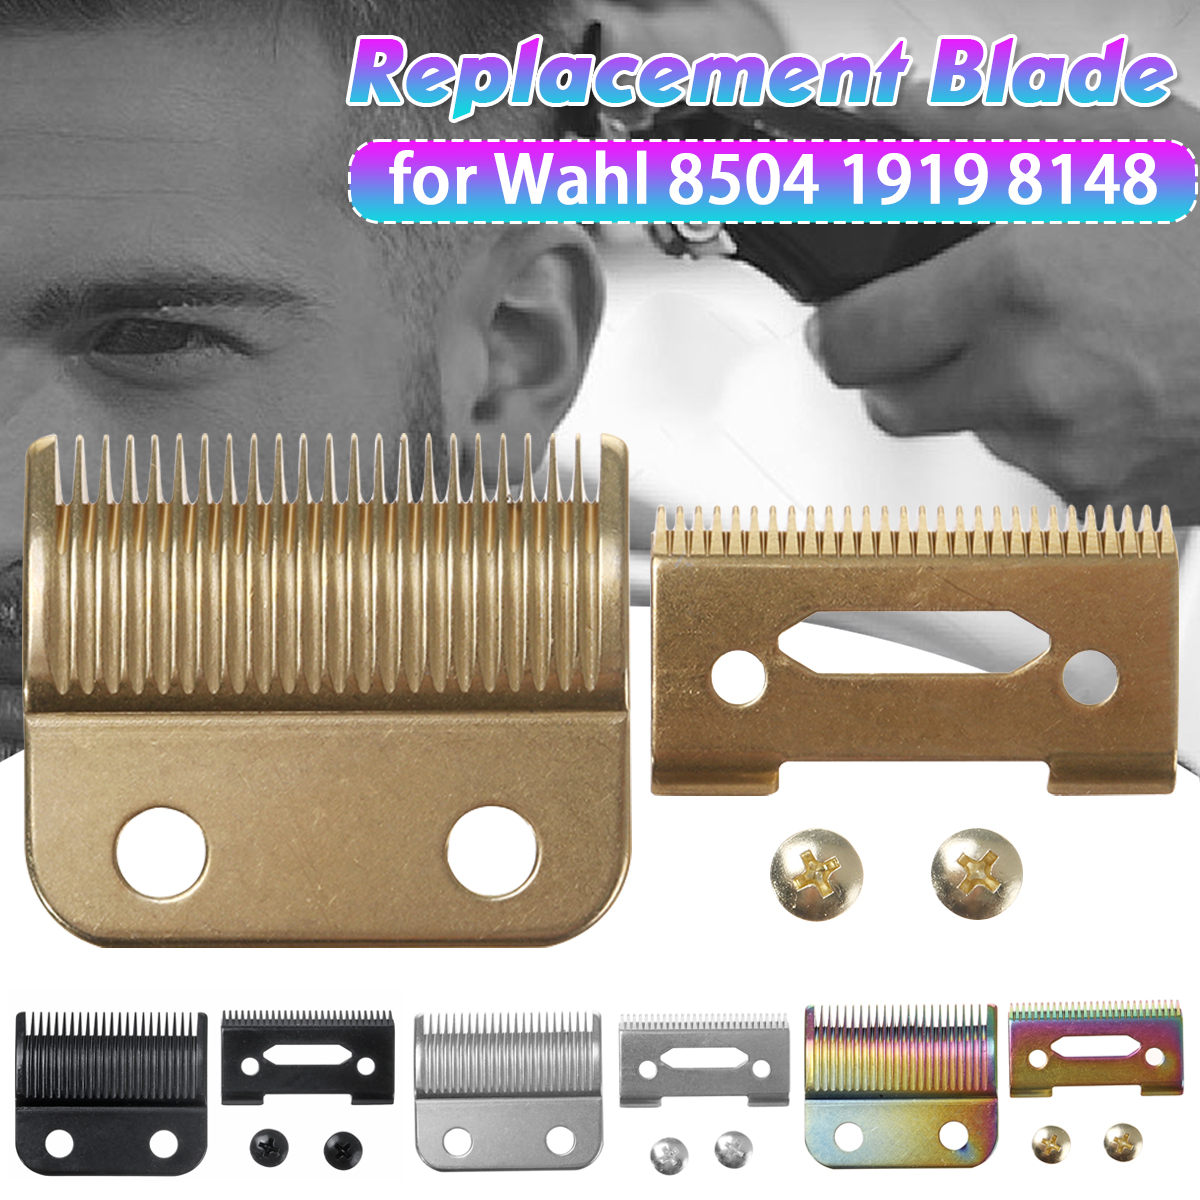 2-in-1-Hair-Cutter-Head-Metal-Bottom-Clipper-Replace-Blade-For-Wahl-Electric-Shear-1925992-1